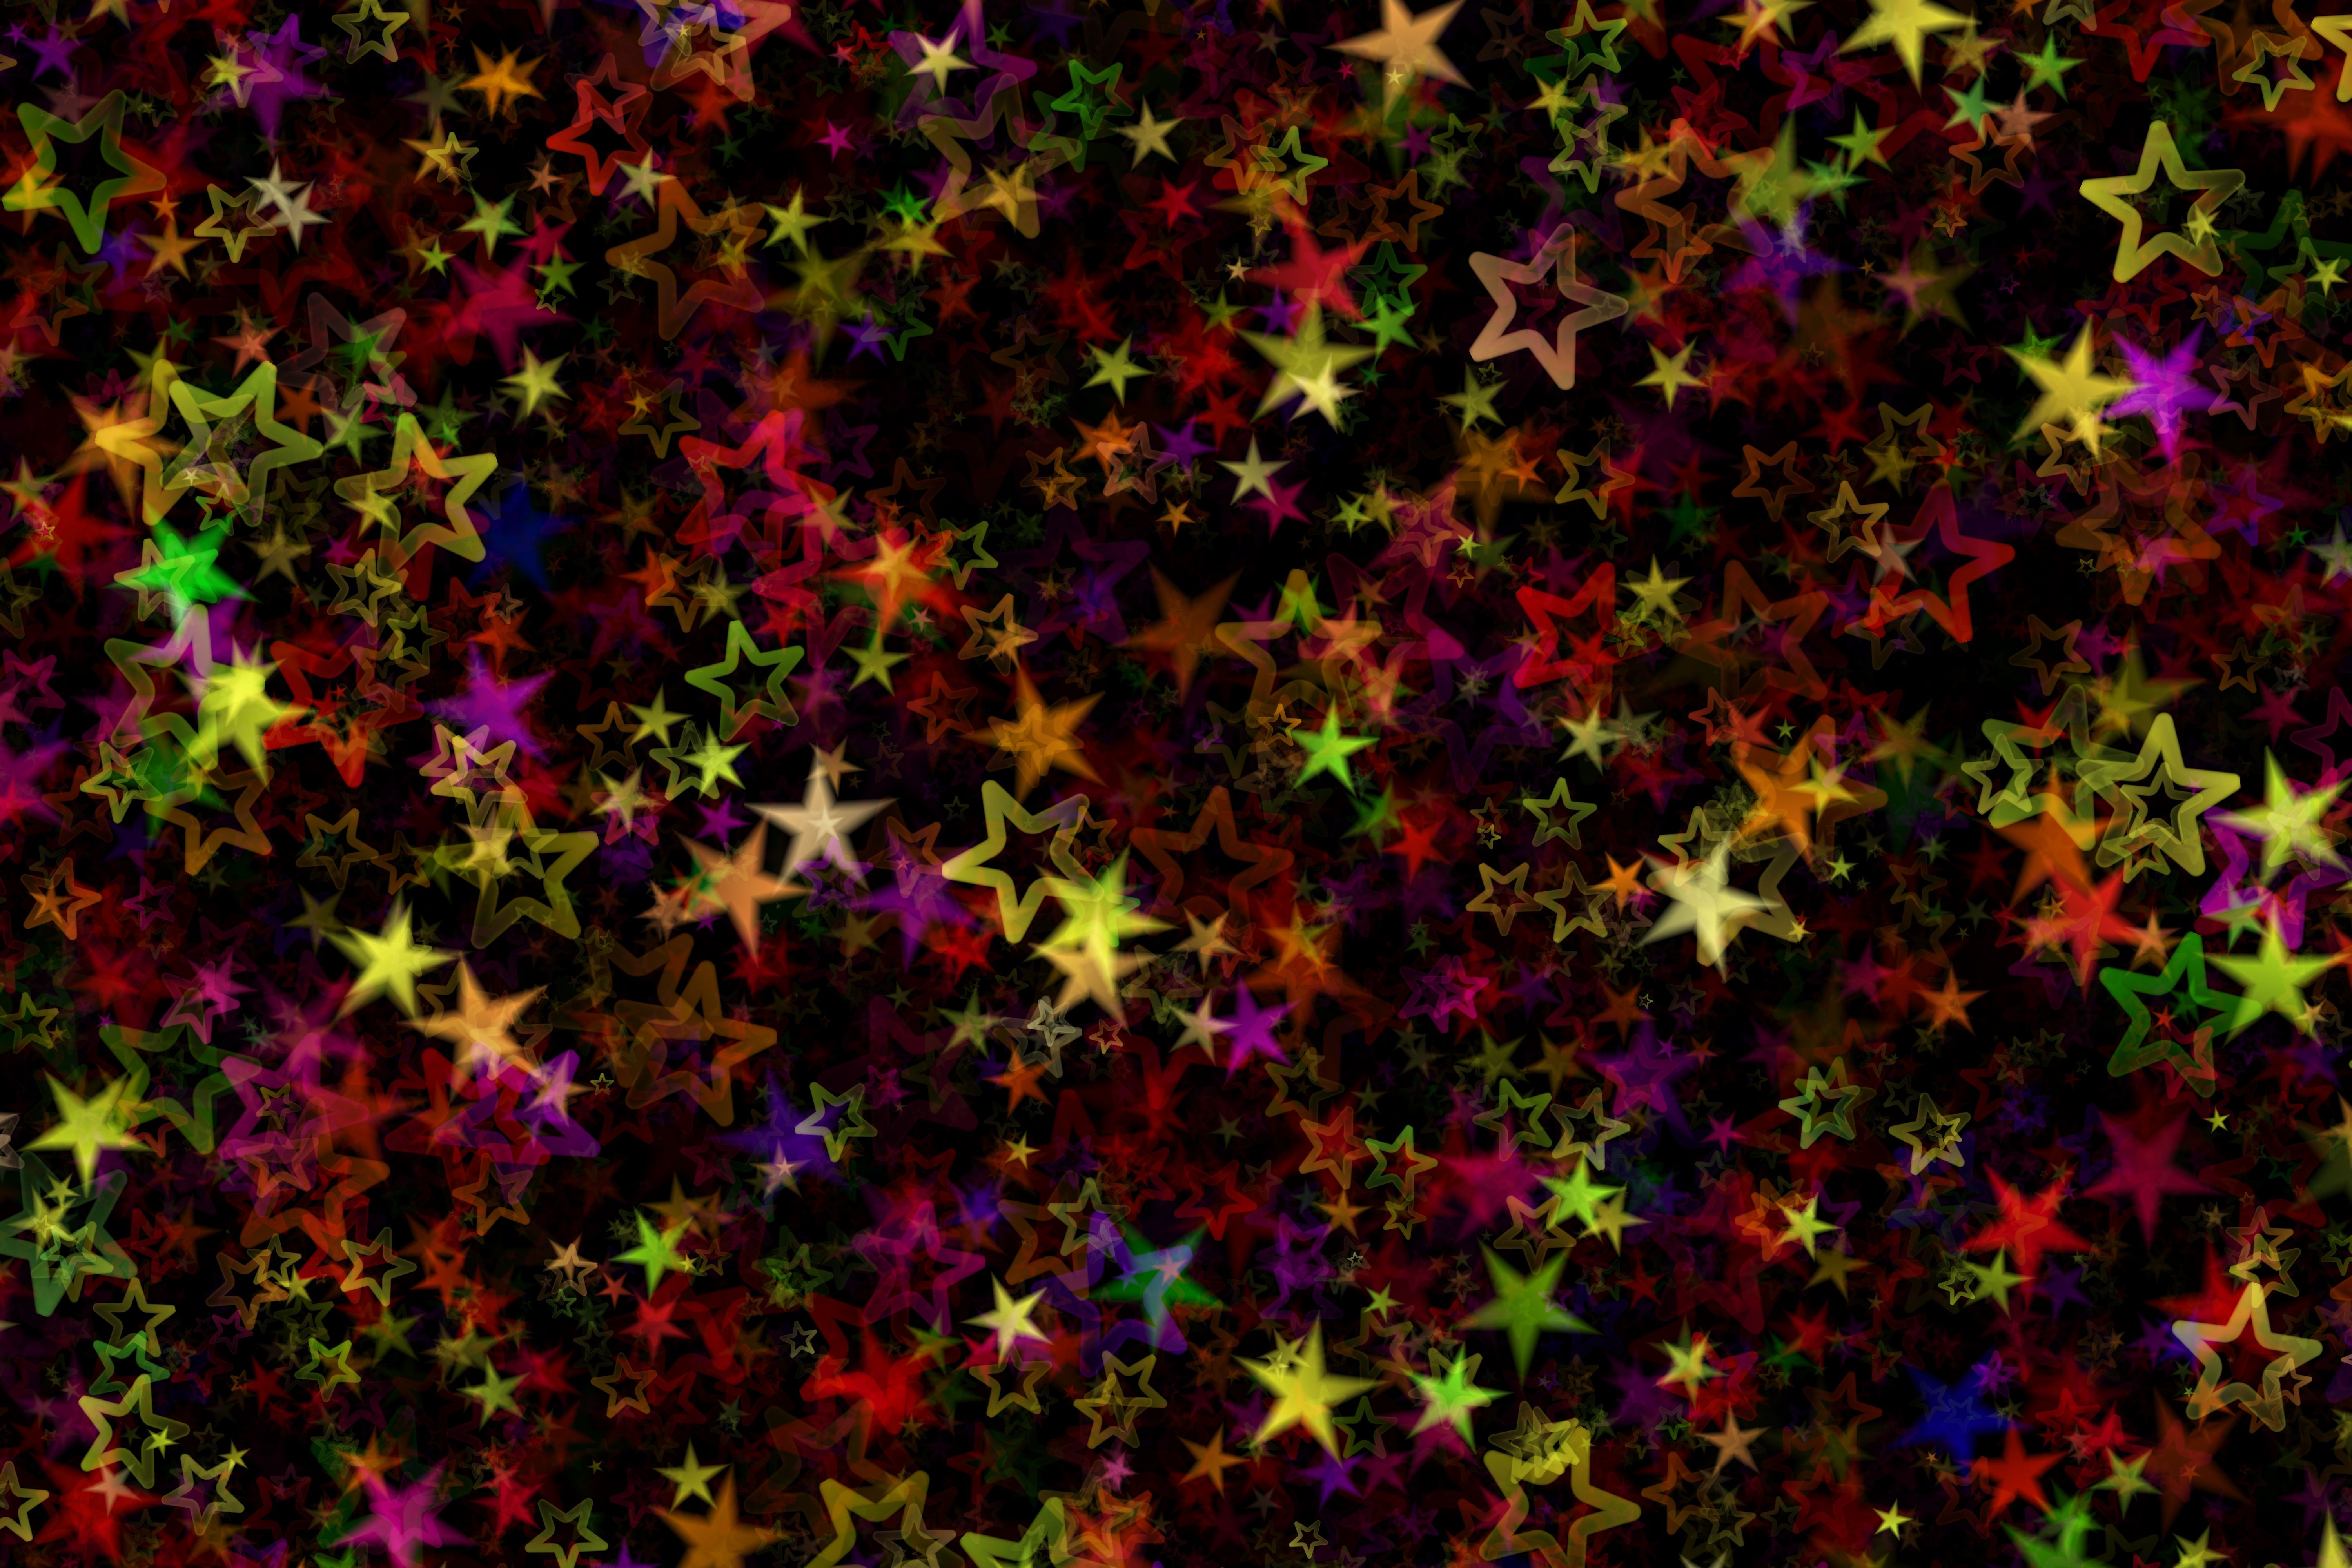 Download wallpaper 6000x4000 stars, colorful, art, abstract HD background